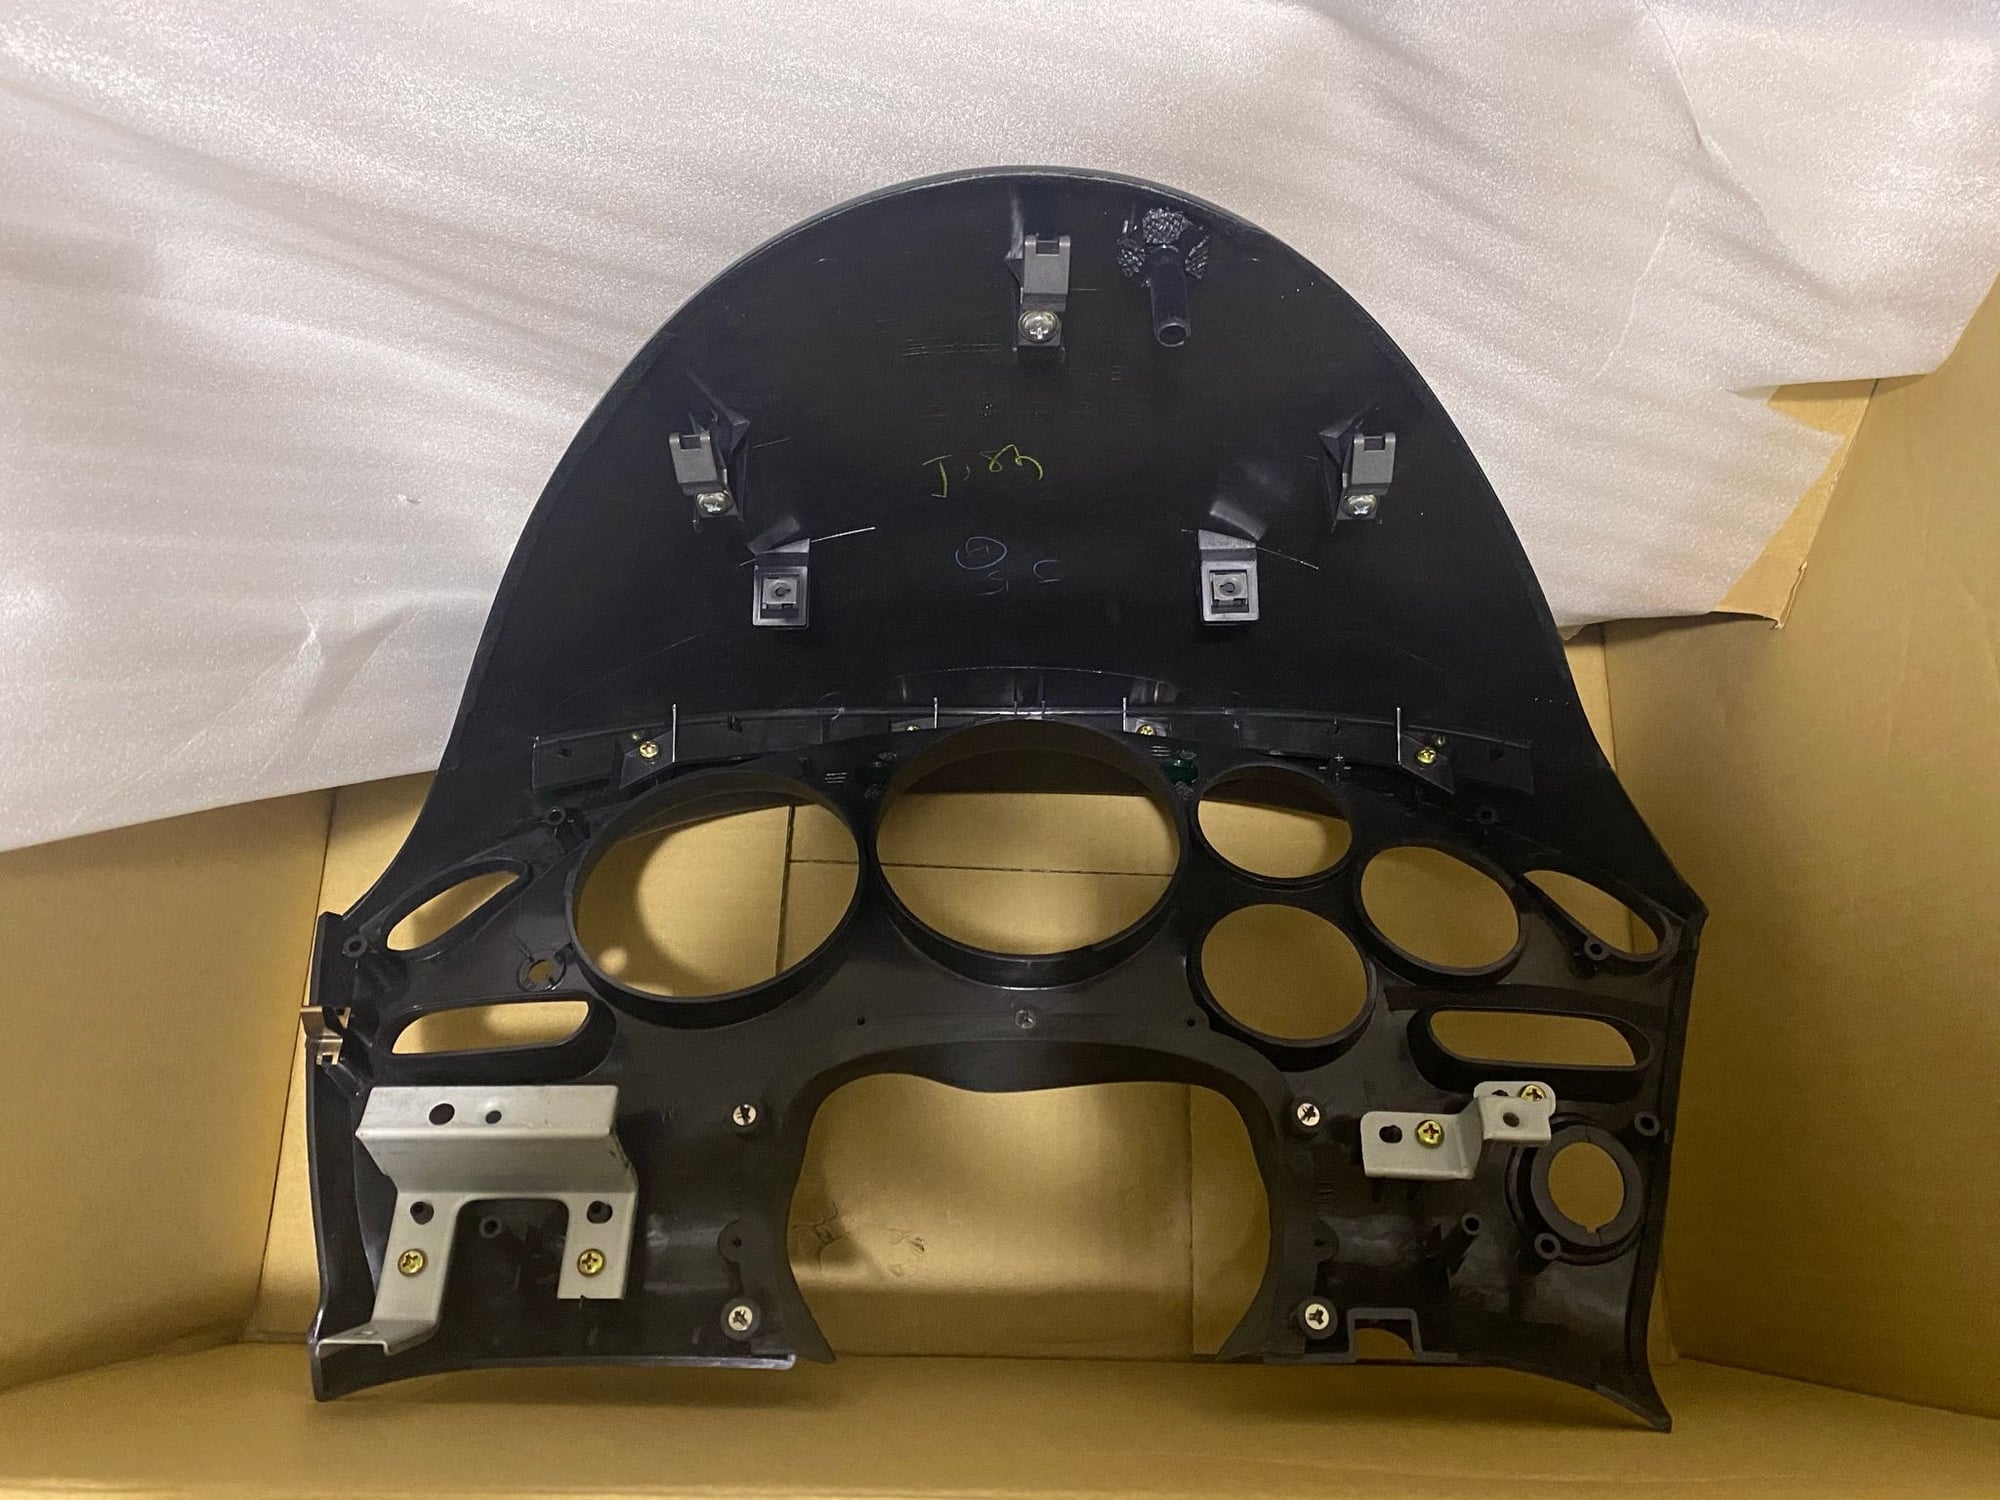 Interior/Upholstery - BNIB TEXTURED Meter Hood / Cluster Surround RHD FD - New - 1992 to 2002 Mazda RX-7 - Green Cove Springs, FL 32043, United States